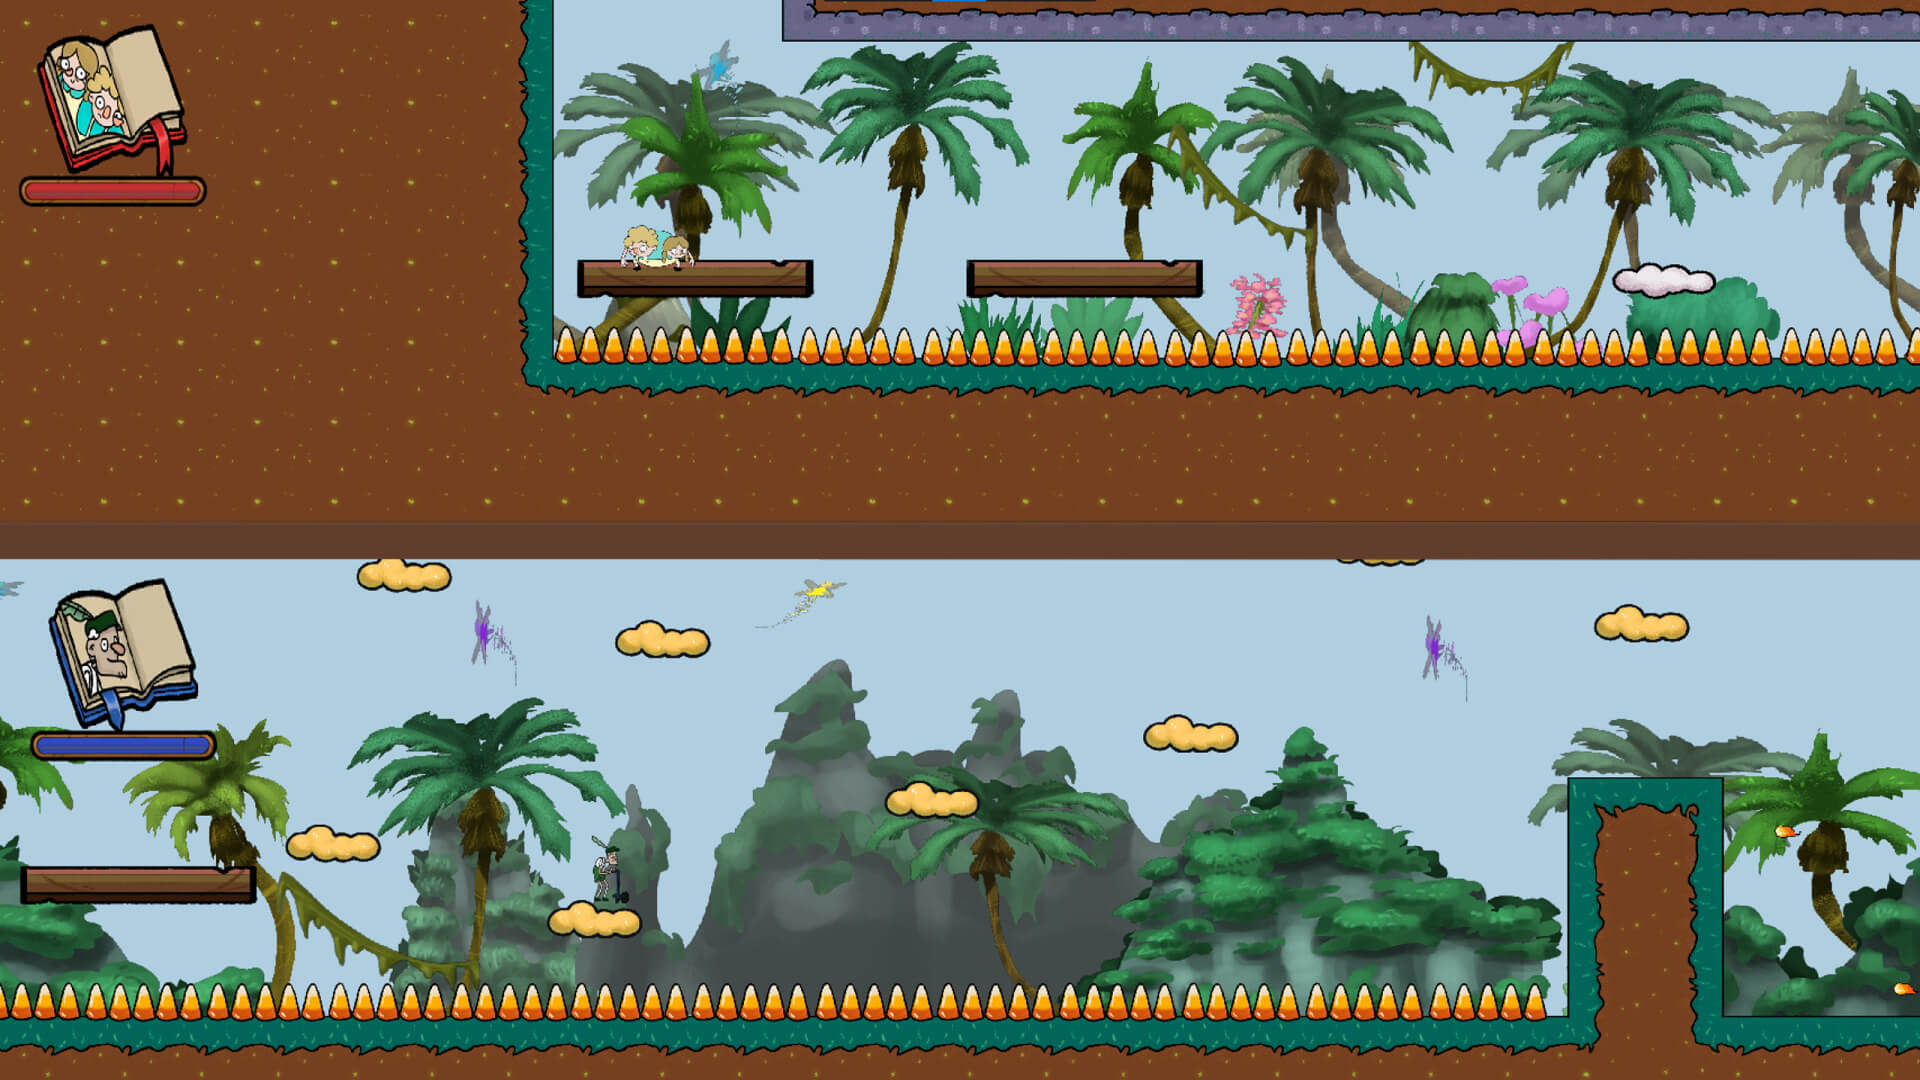 Two players race for the magic potion, each advancing at their own pace on a mysterious island filled with palm trees and floating clouds.